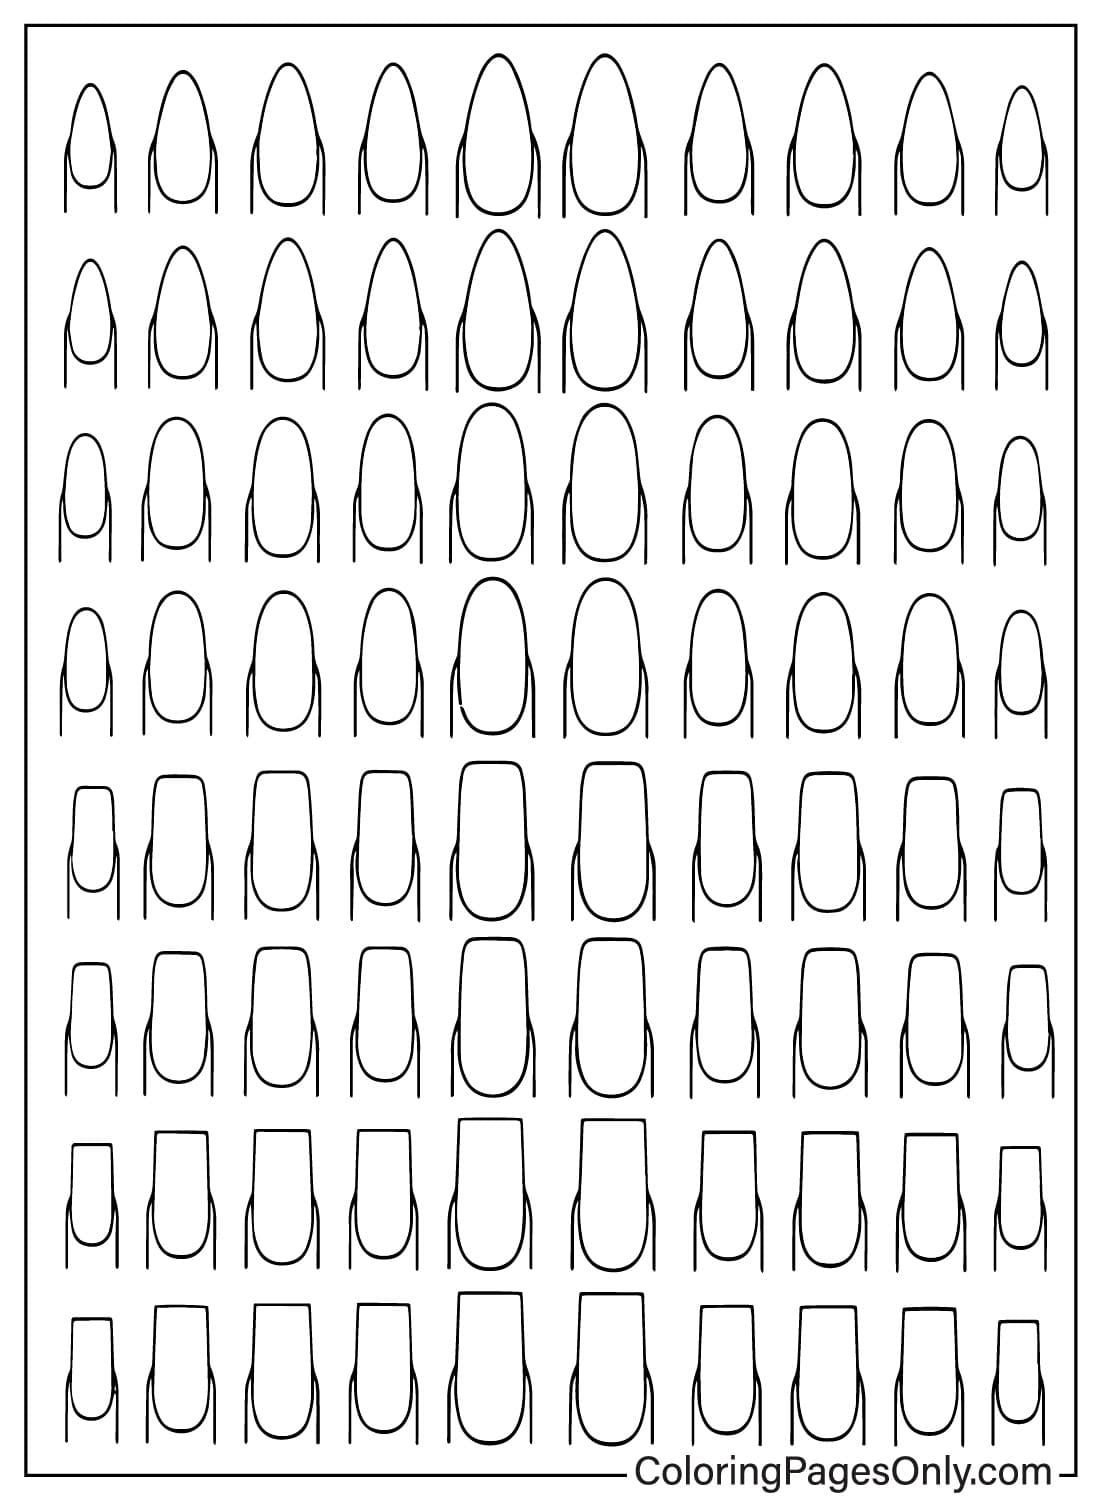 Nails Coloring Page for Adults - Free Printable Coloring Pages